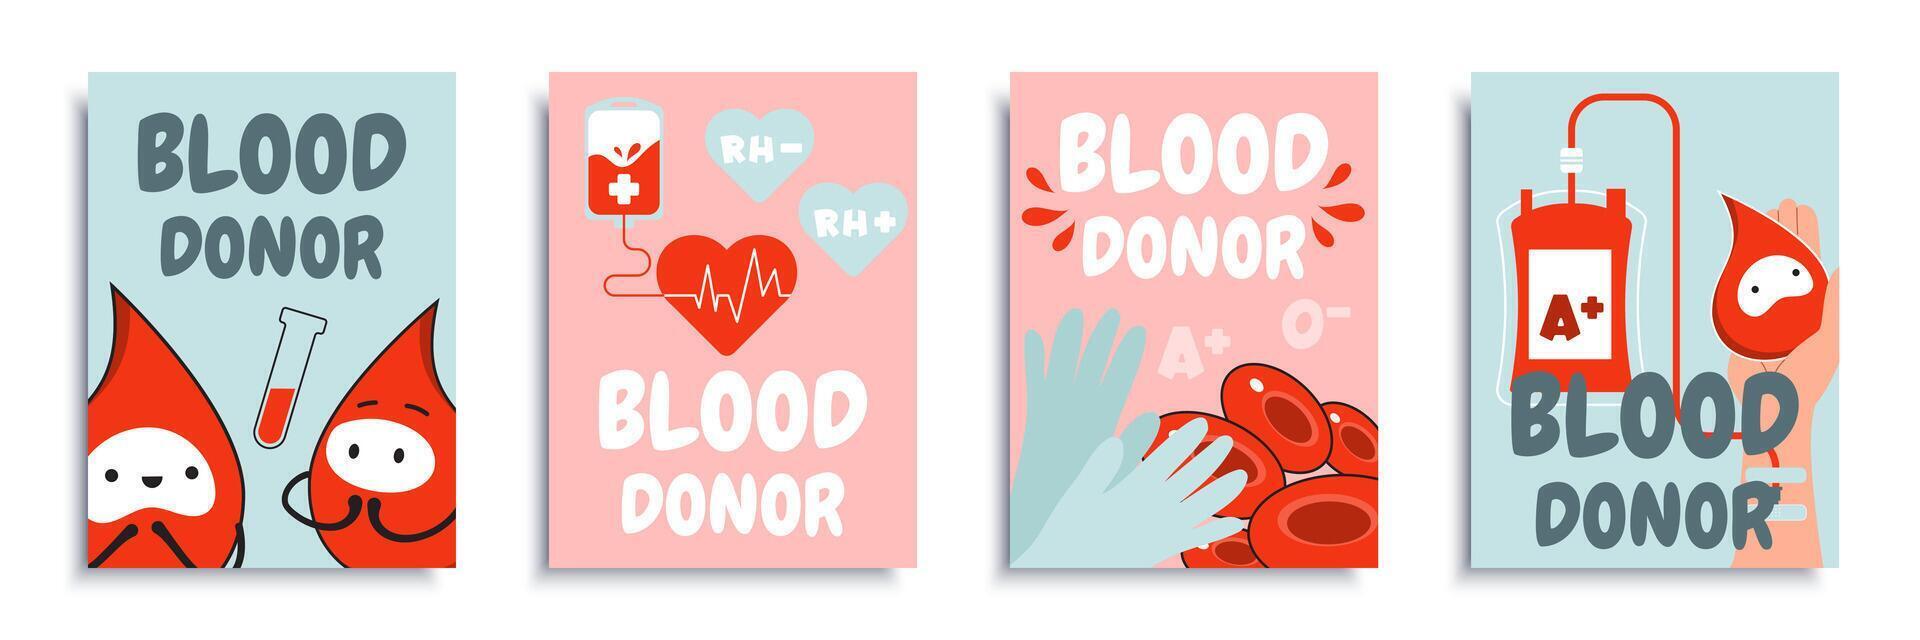 Blood donor cover brochure set in flat design. Poster templates with cute drop characters, test tubes with der liquid, droppers, cells, medical gloves, other symbols of donation. Vector illustration.